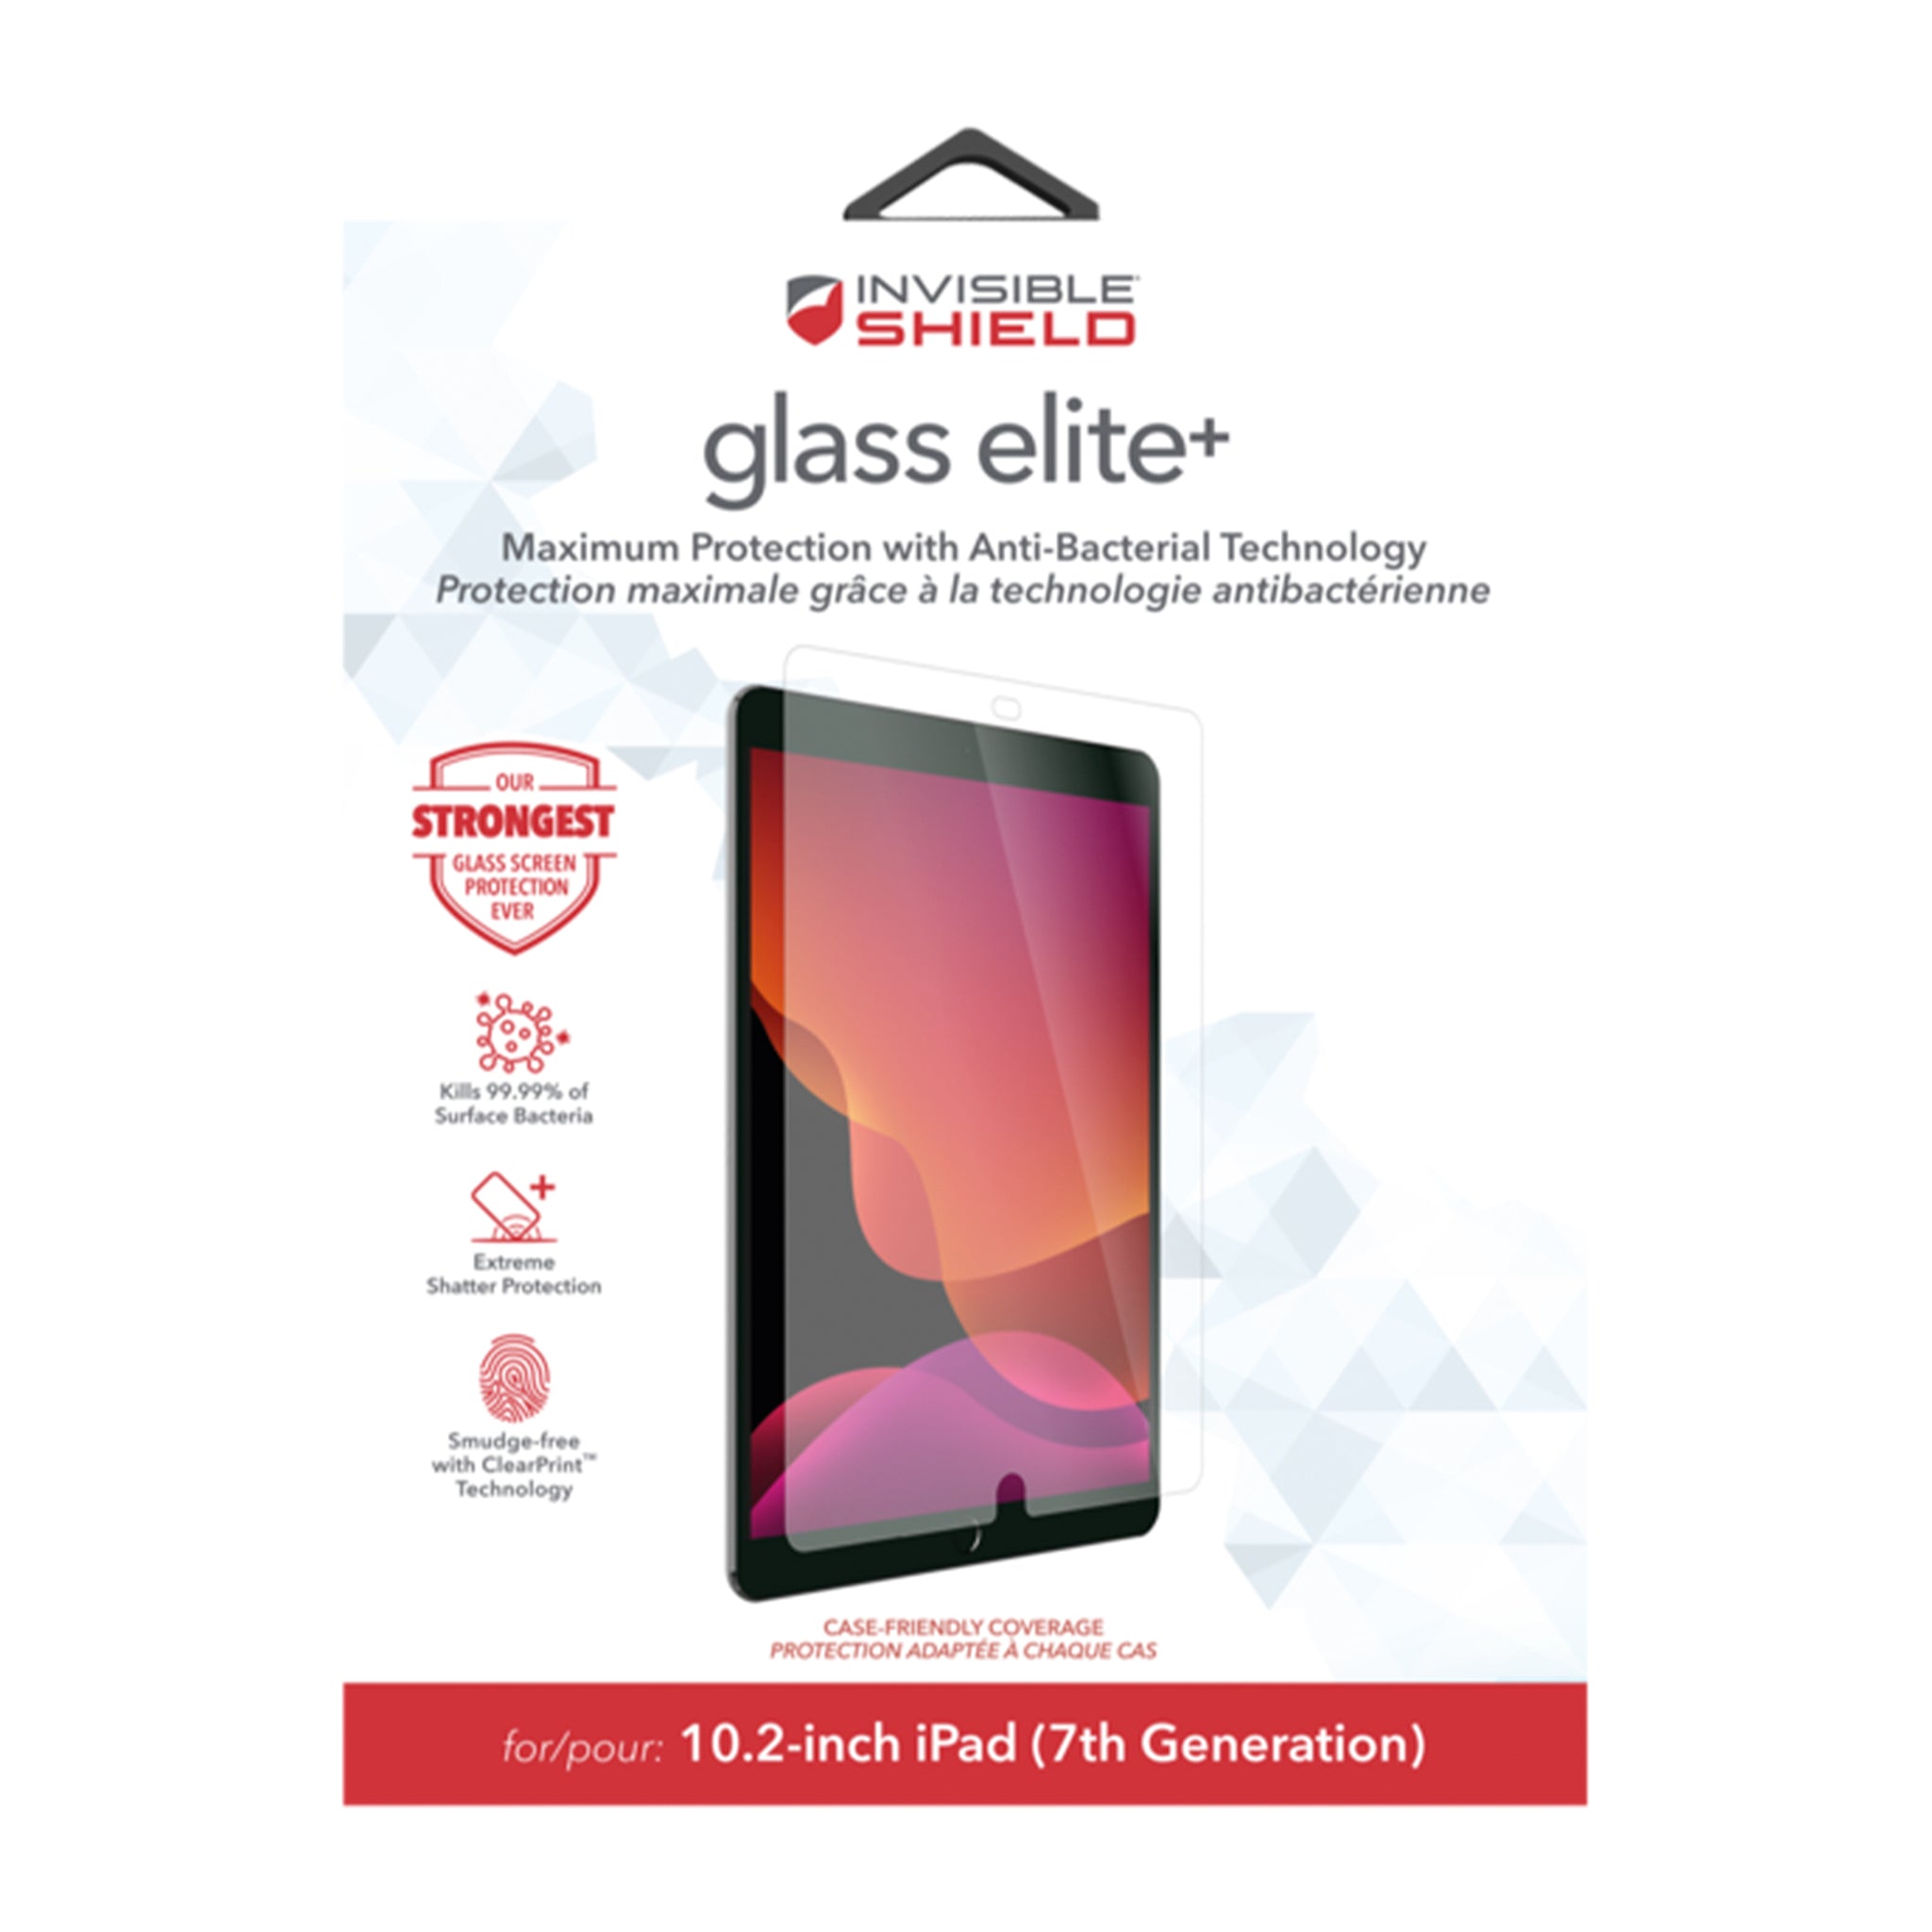 ZAGG - Invisibleshield Glass Elite Visionguard Plus Glass Screen Protector For Apple Ipad 10.2 - Clear